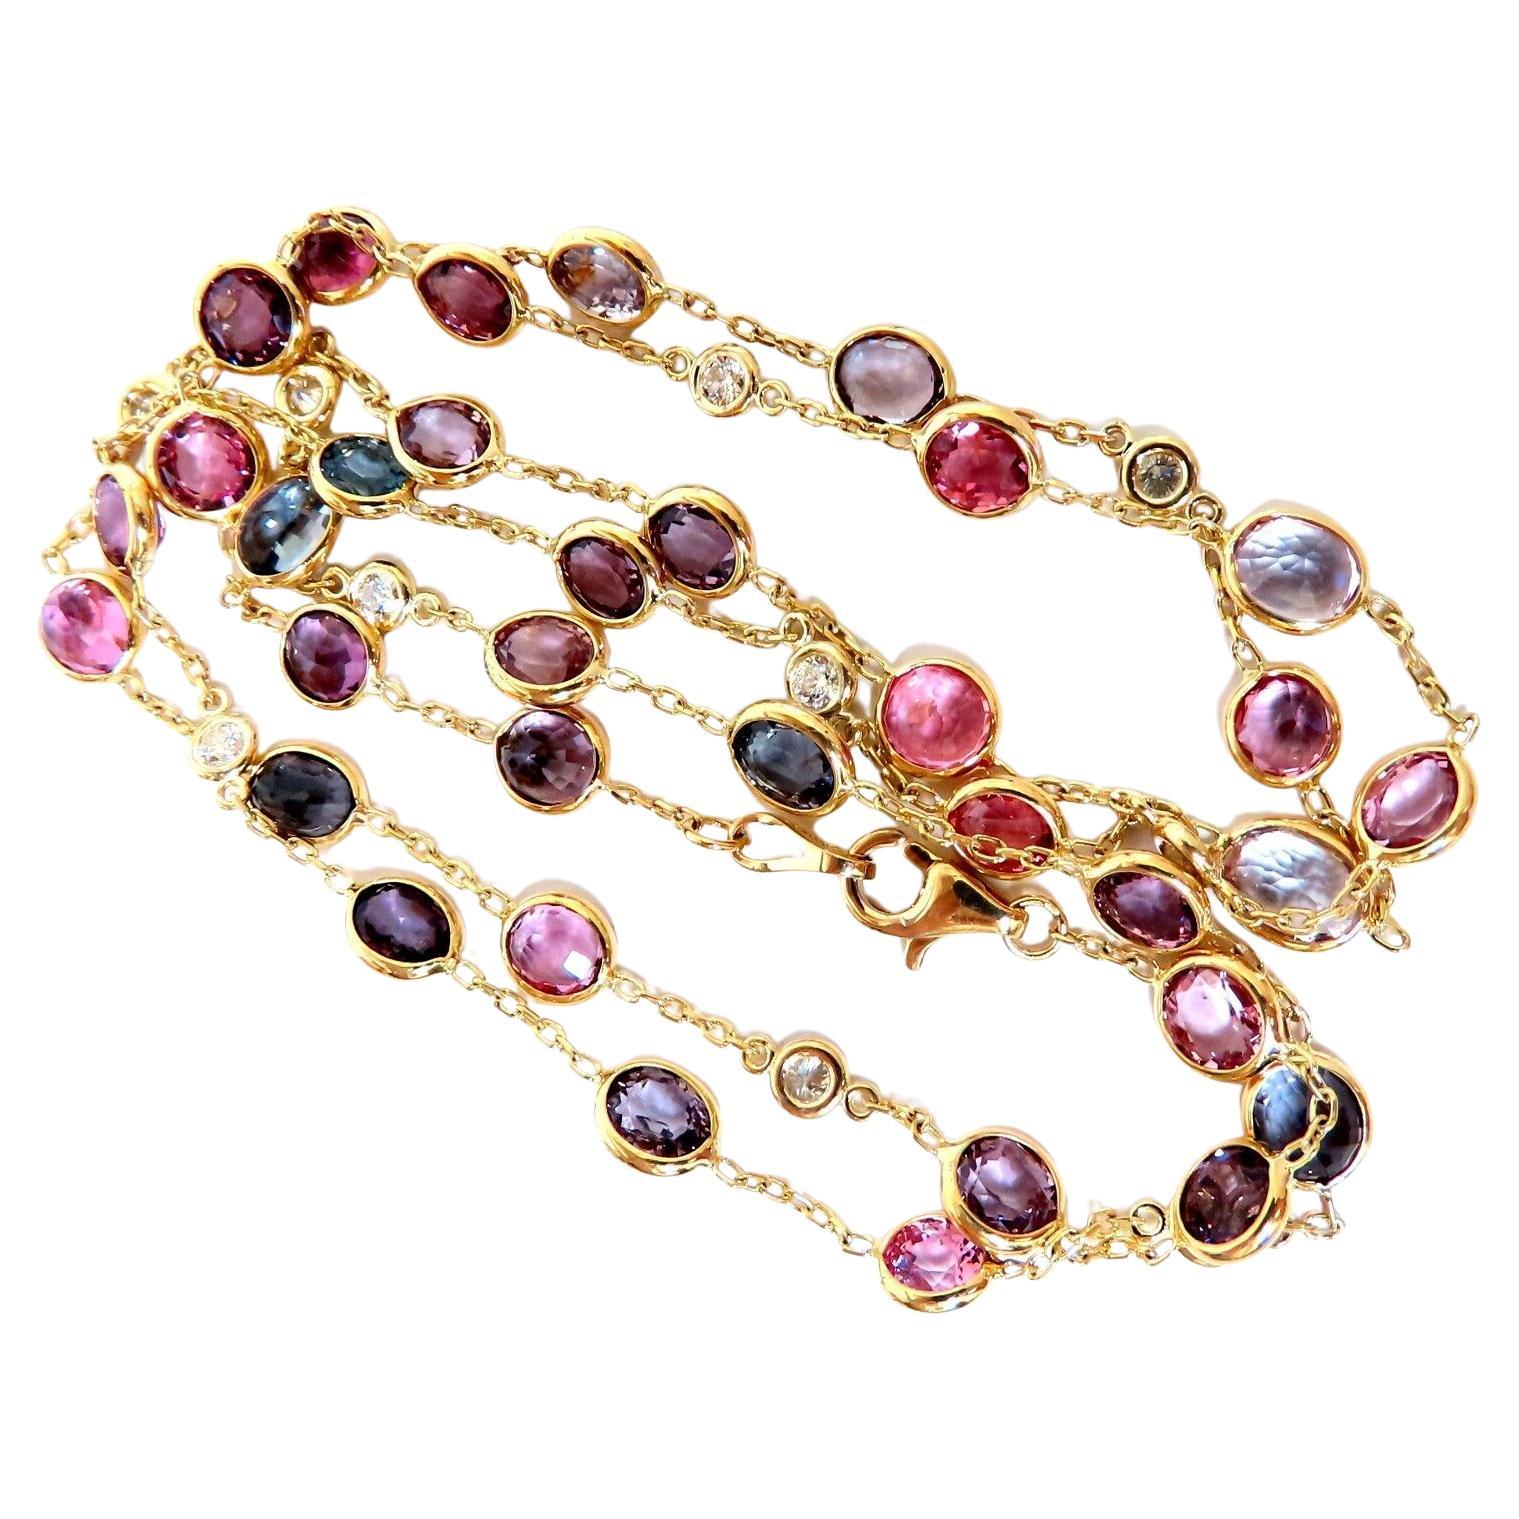 20ct Multi-Colored Natural Spinel Diamonds Yard Necklace 14kt Gold